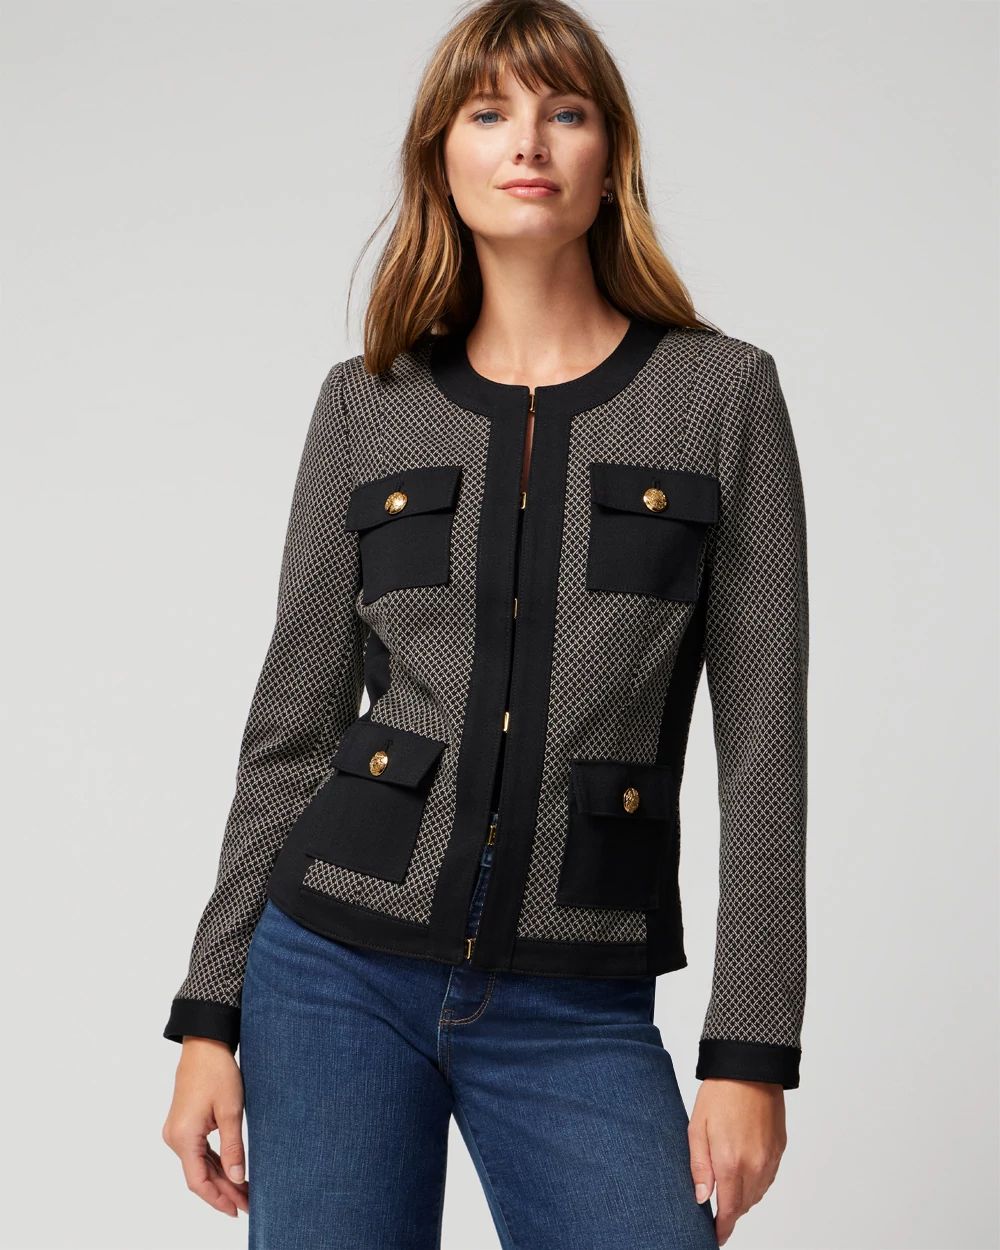 WHBM® Jacquard Knit Stylist Jacket click to view larger image.